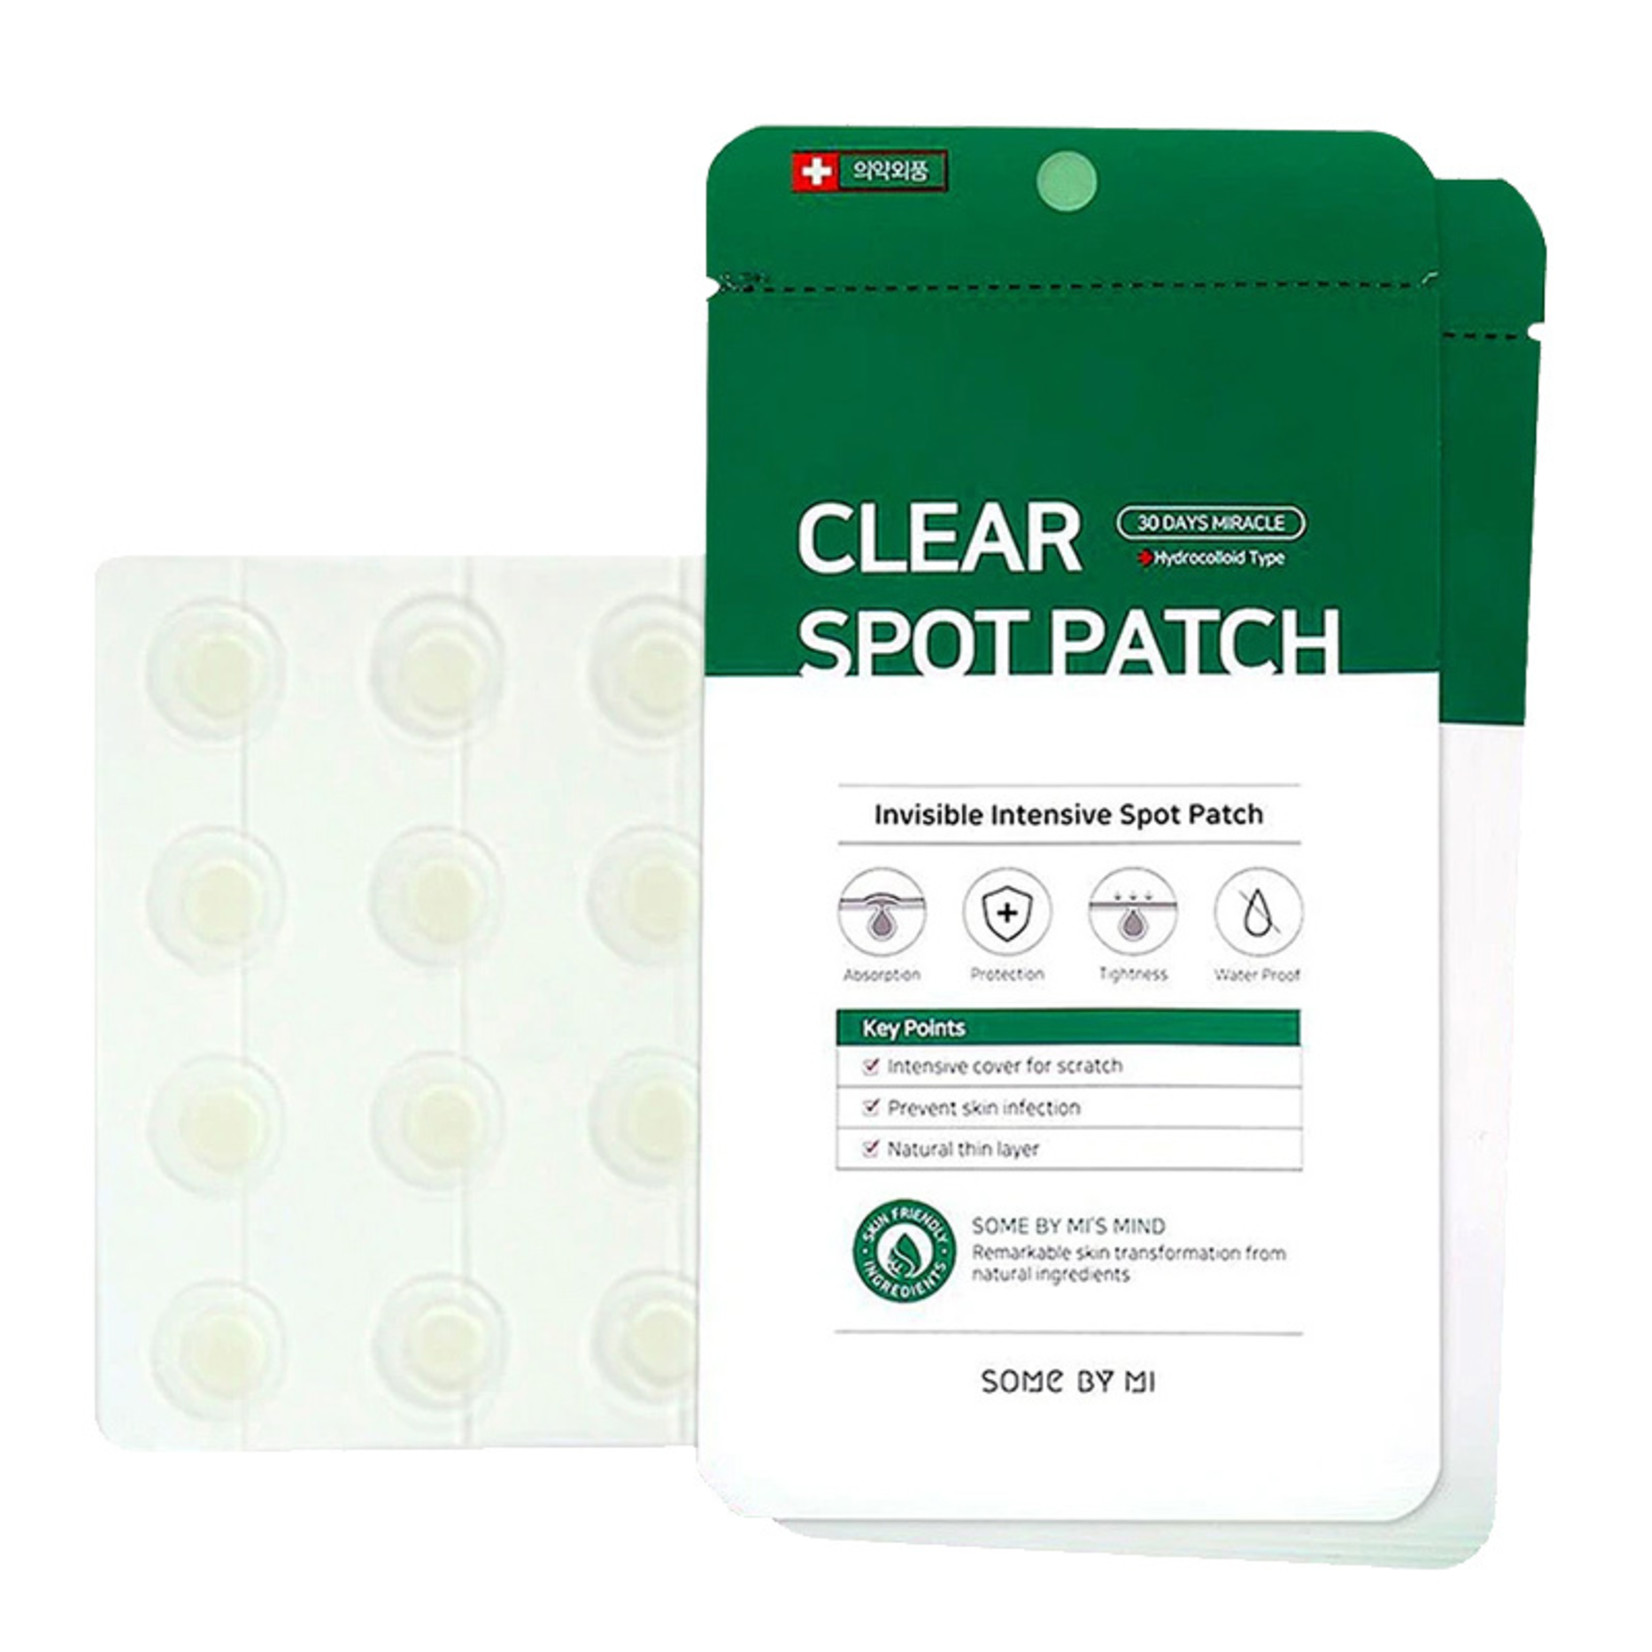 SOME BY MI Clear Spot Patch (1pack/18pcs)